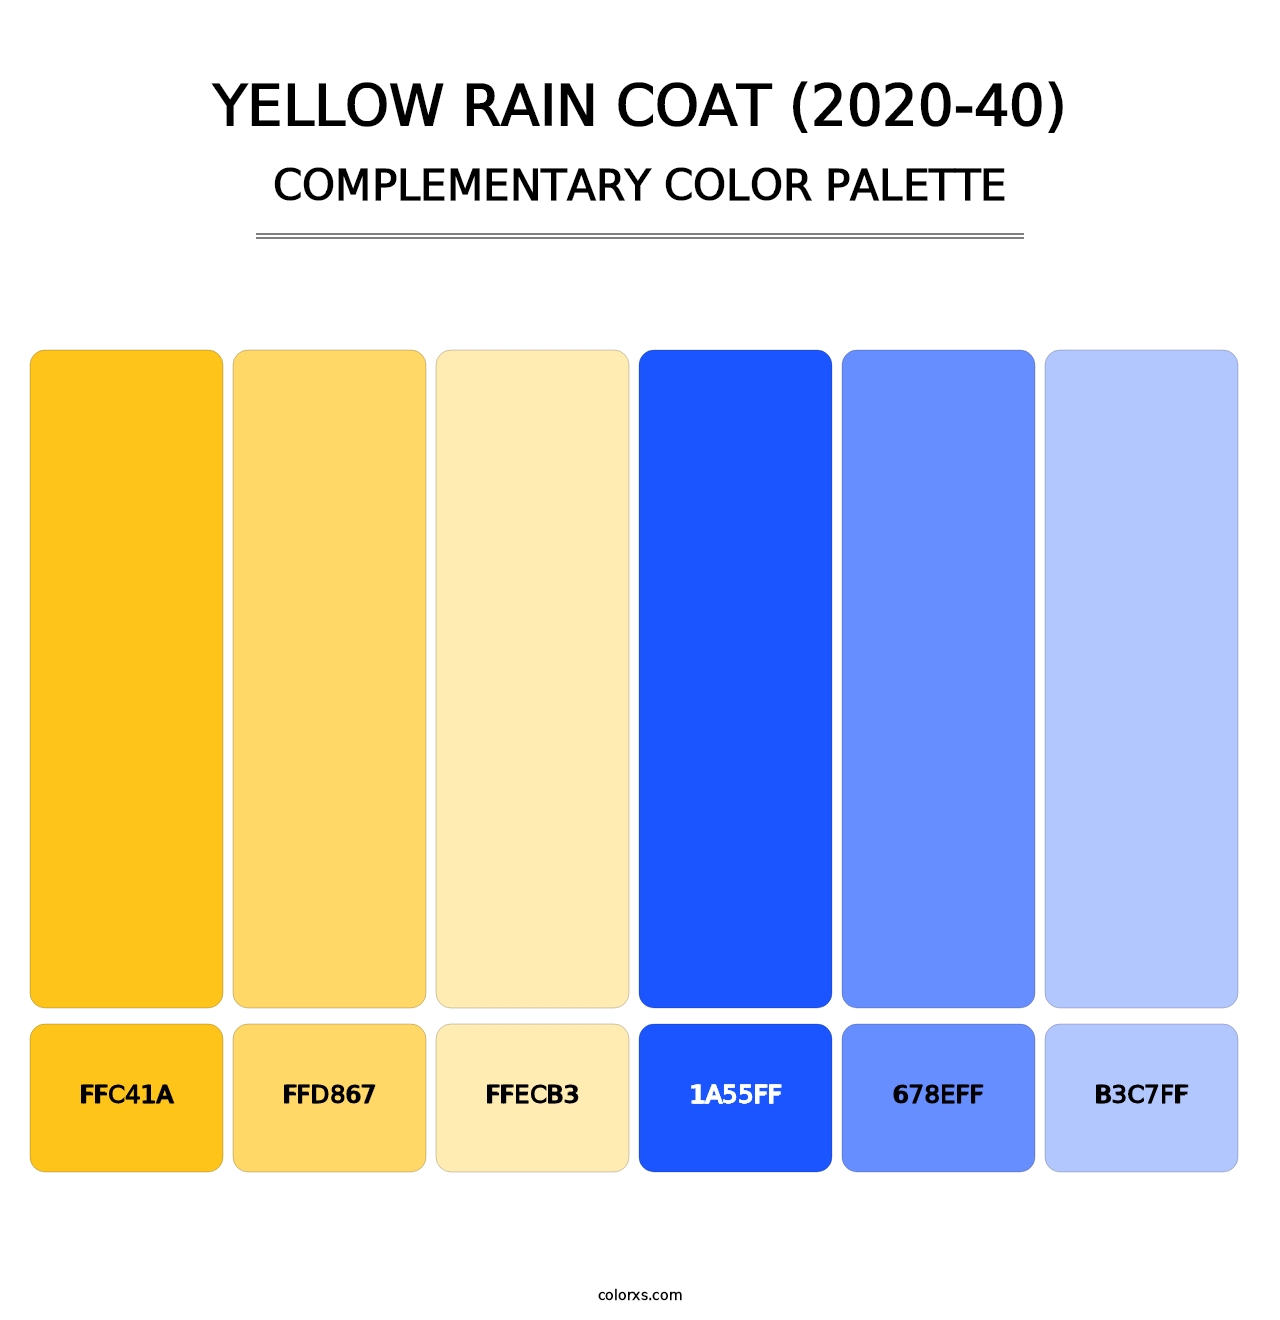 Yellow Rain Coat (2020-40) - Complementary Color Palette